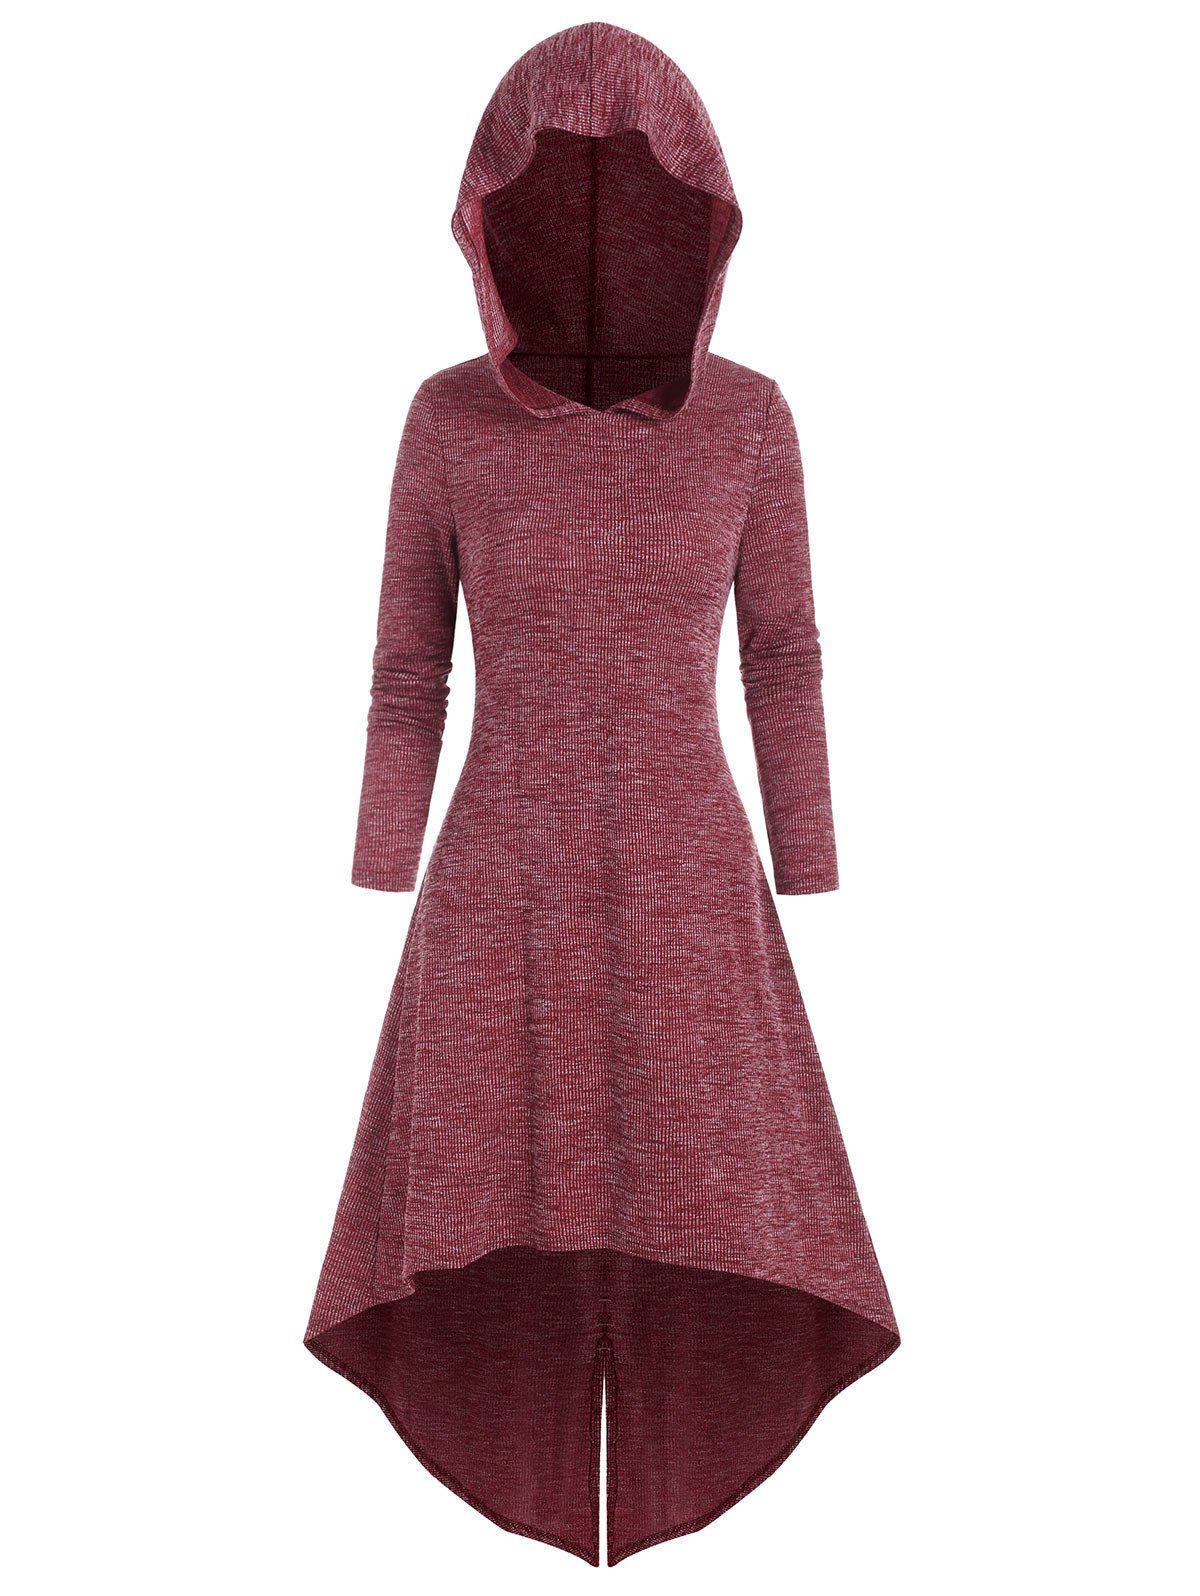 Hooded High Low Knitted Midi Dress - RED WINE 3XL